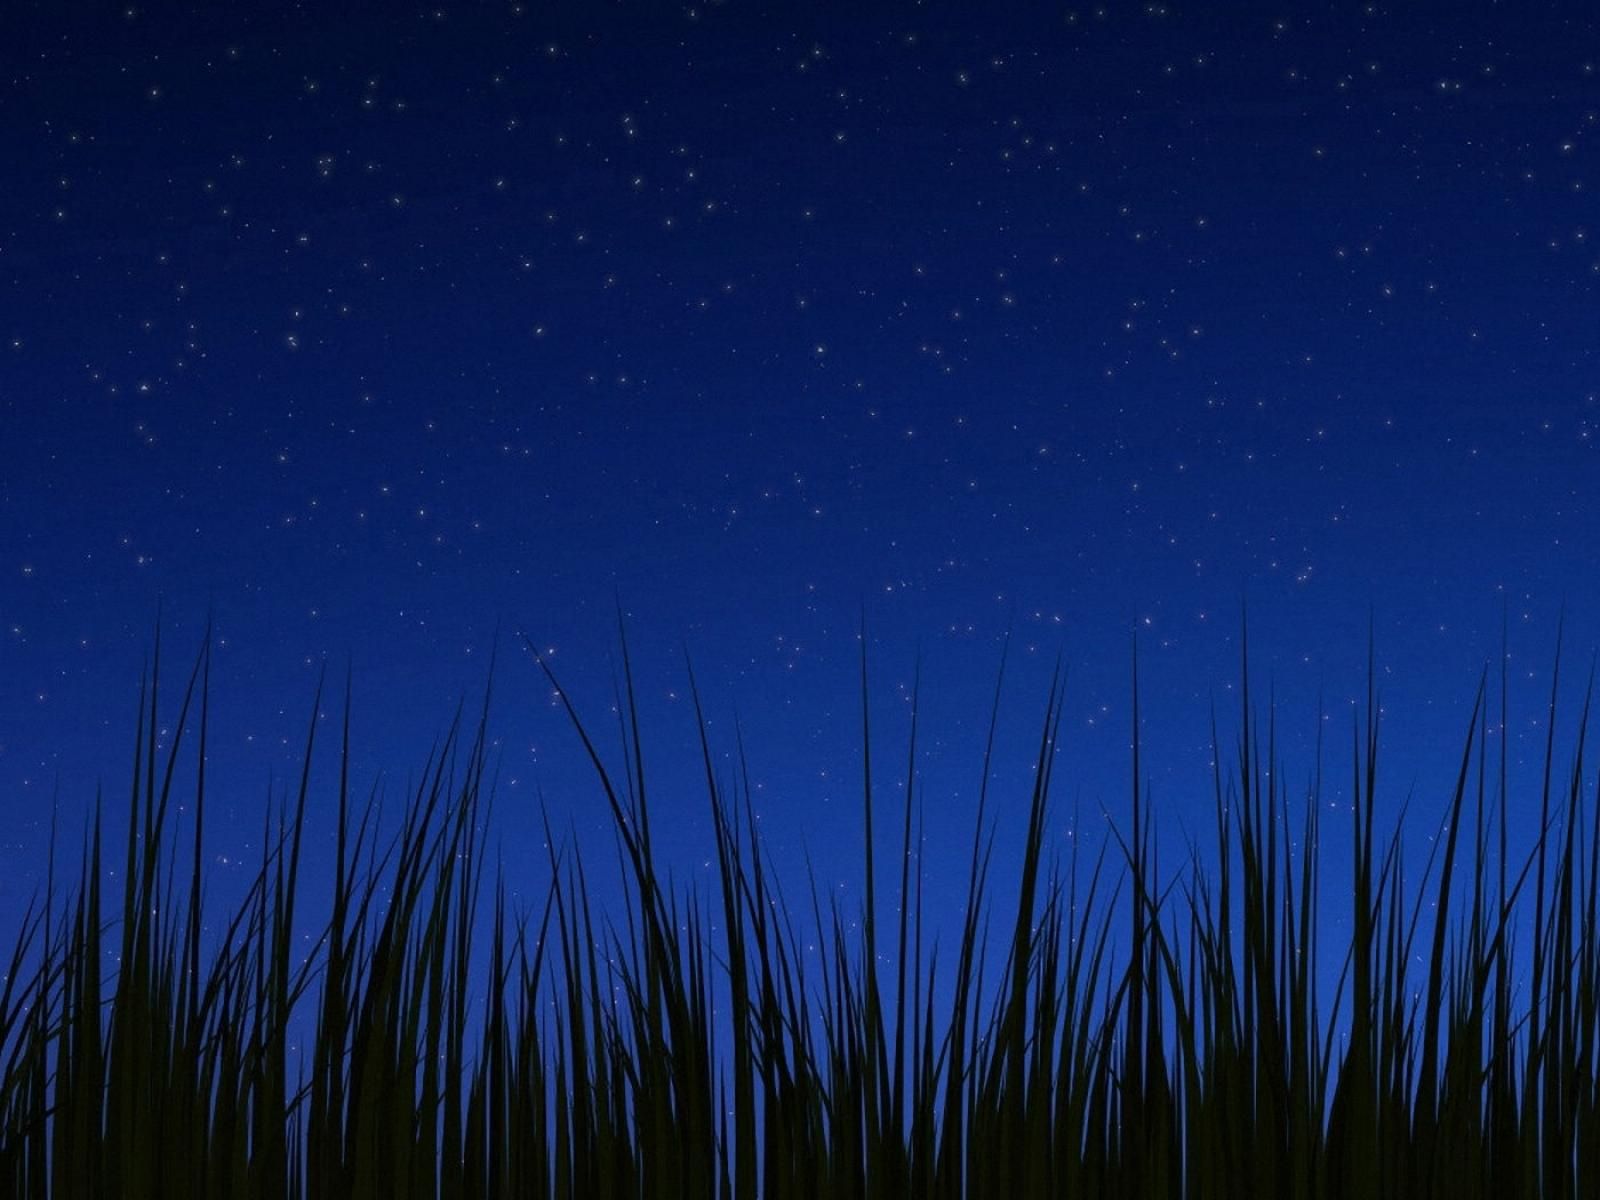 Android 3.0 night wallpaper wallpapers | Android 3.0 night ...